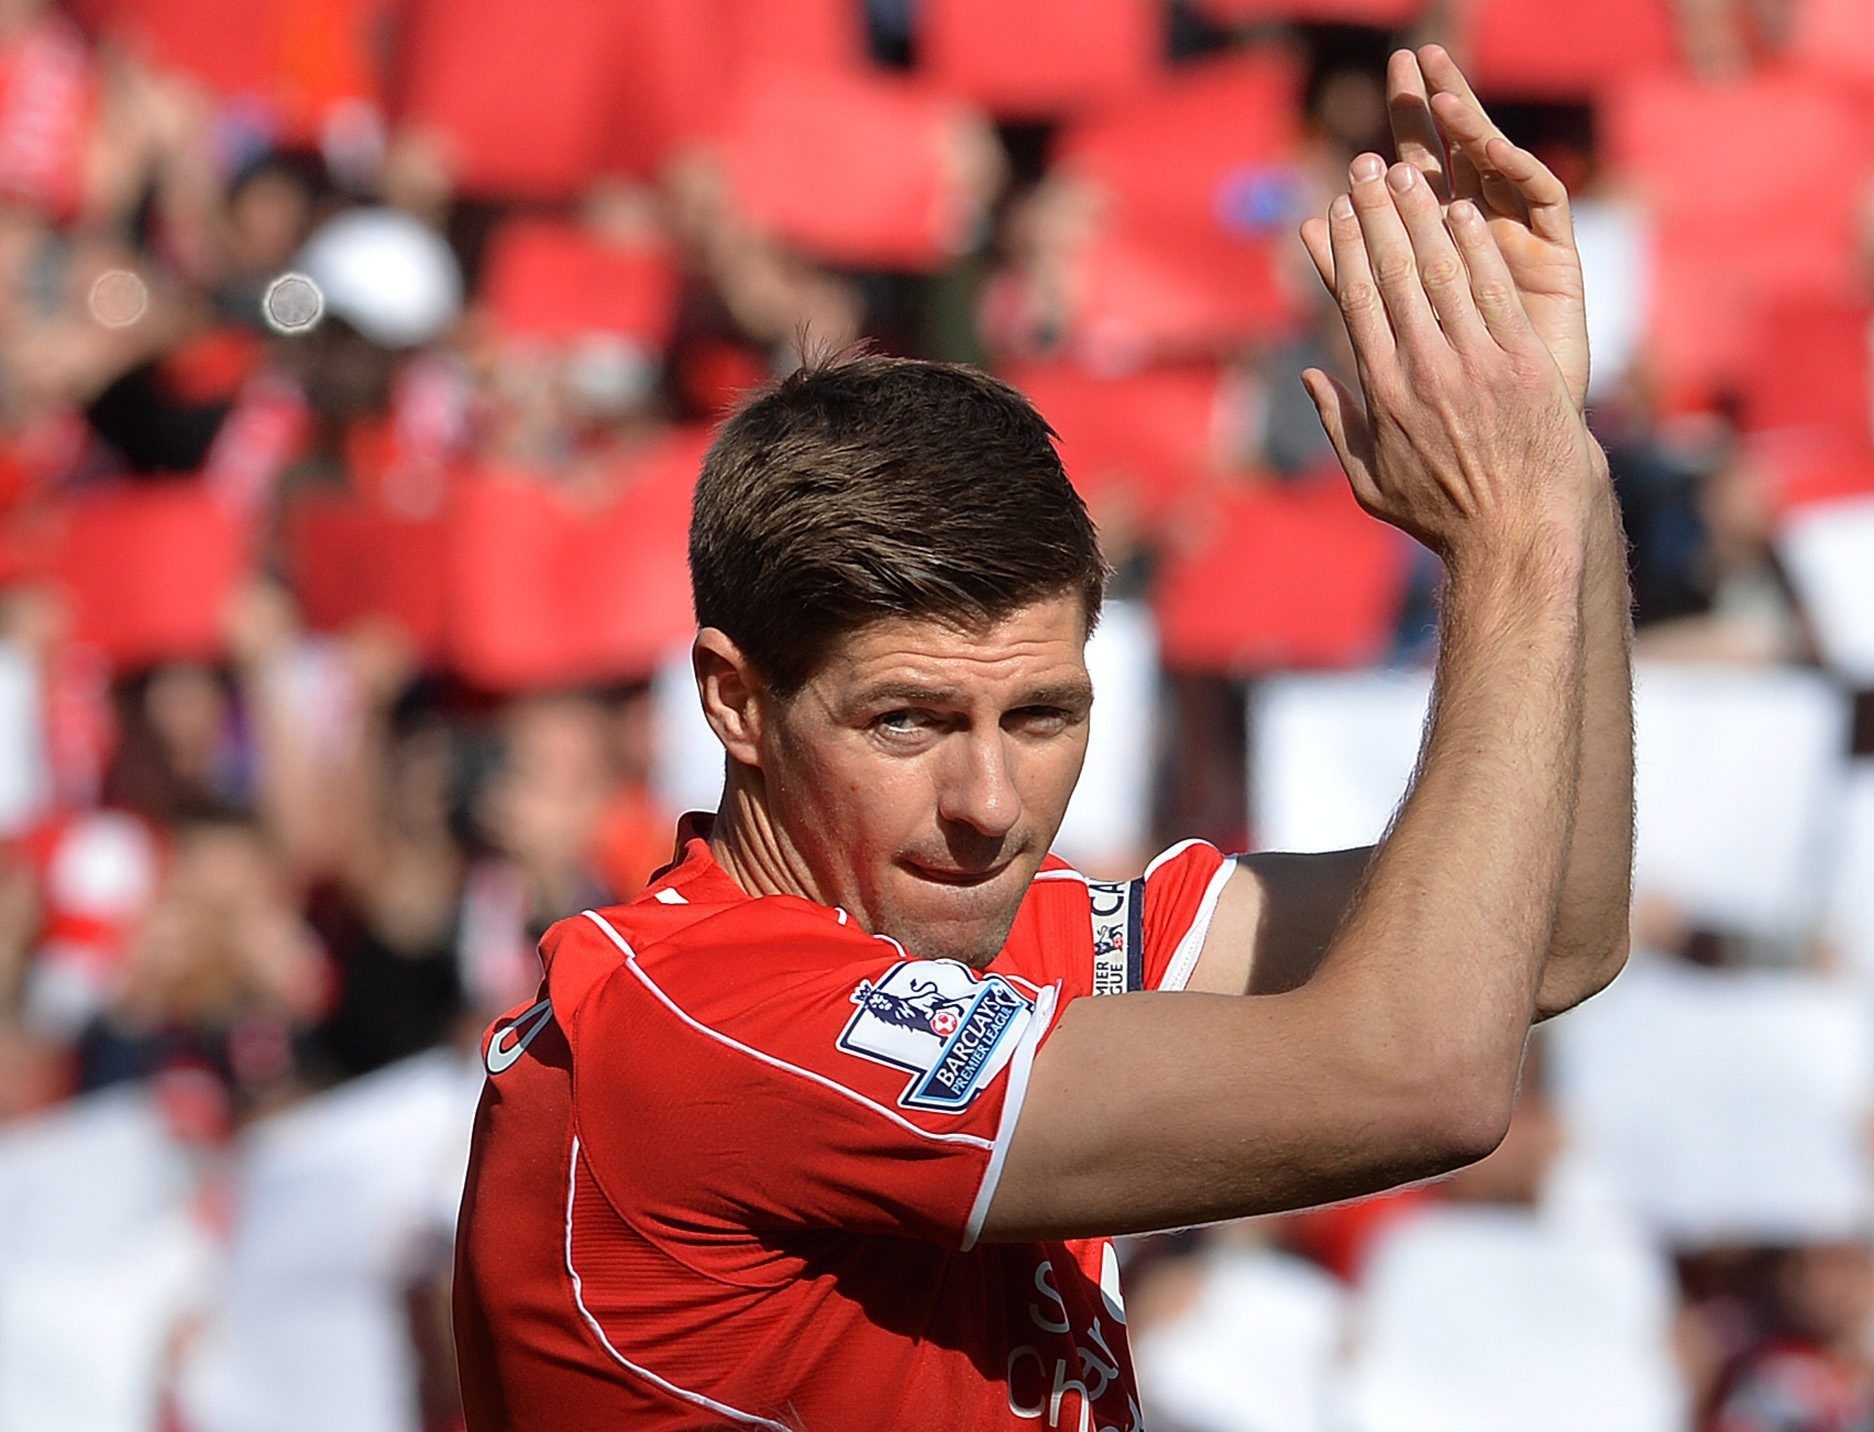 A file picture of Liverpool's Steven Gerrard applauding fans during the English Premier League soccer match between Liverpool and Crystal Palace at the Anfield in Liverpool, Britain, 16 April 2015. (EPA Photo)